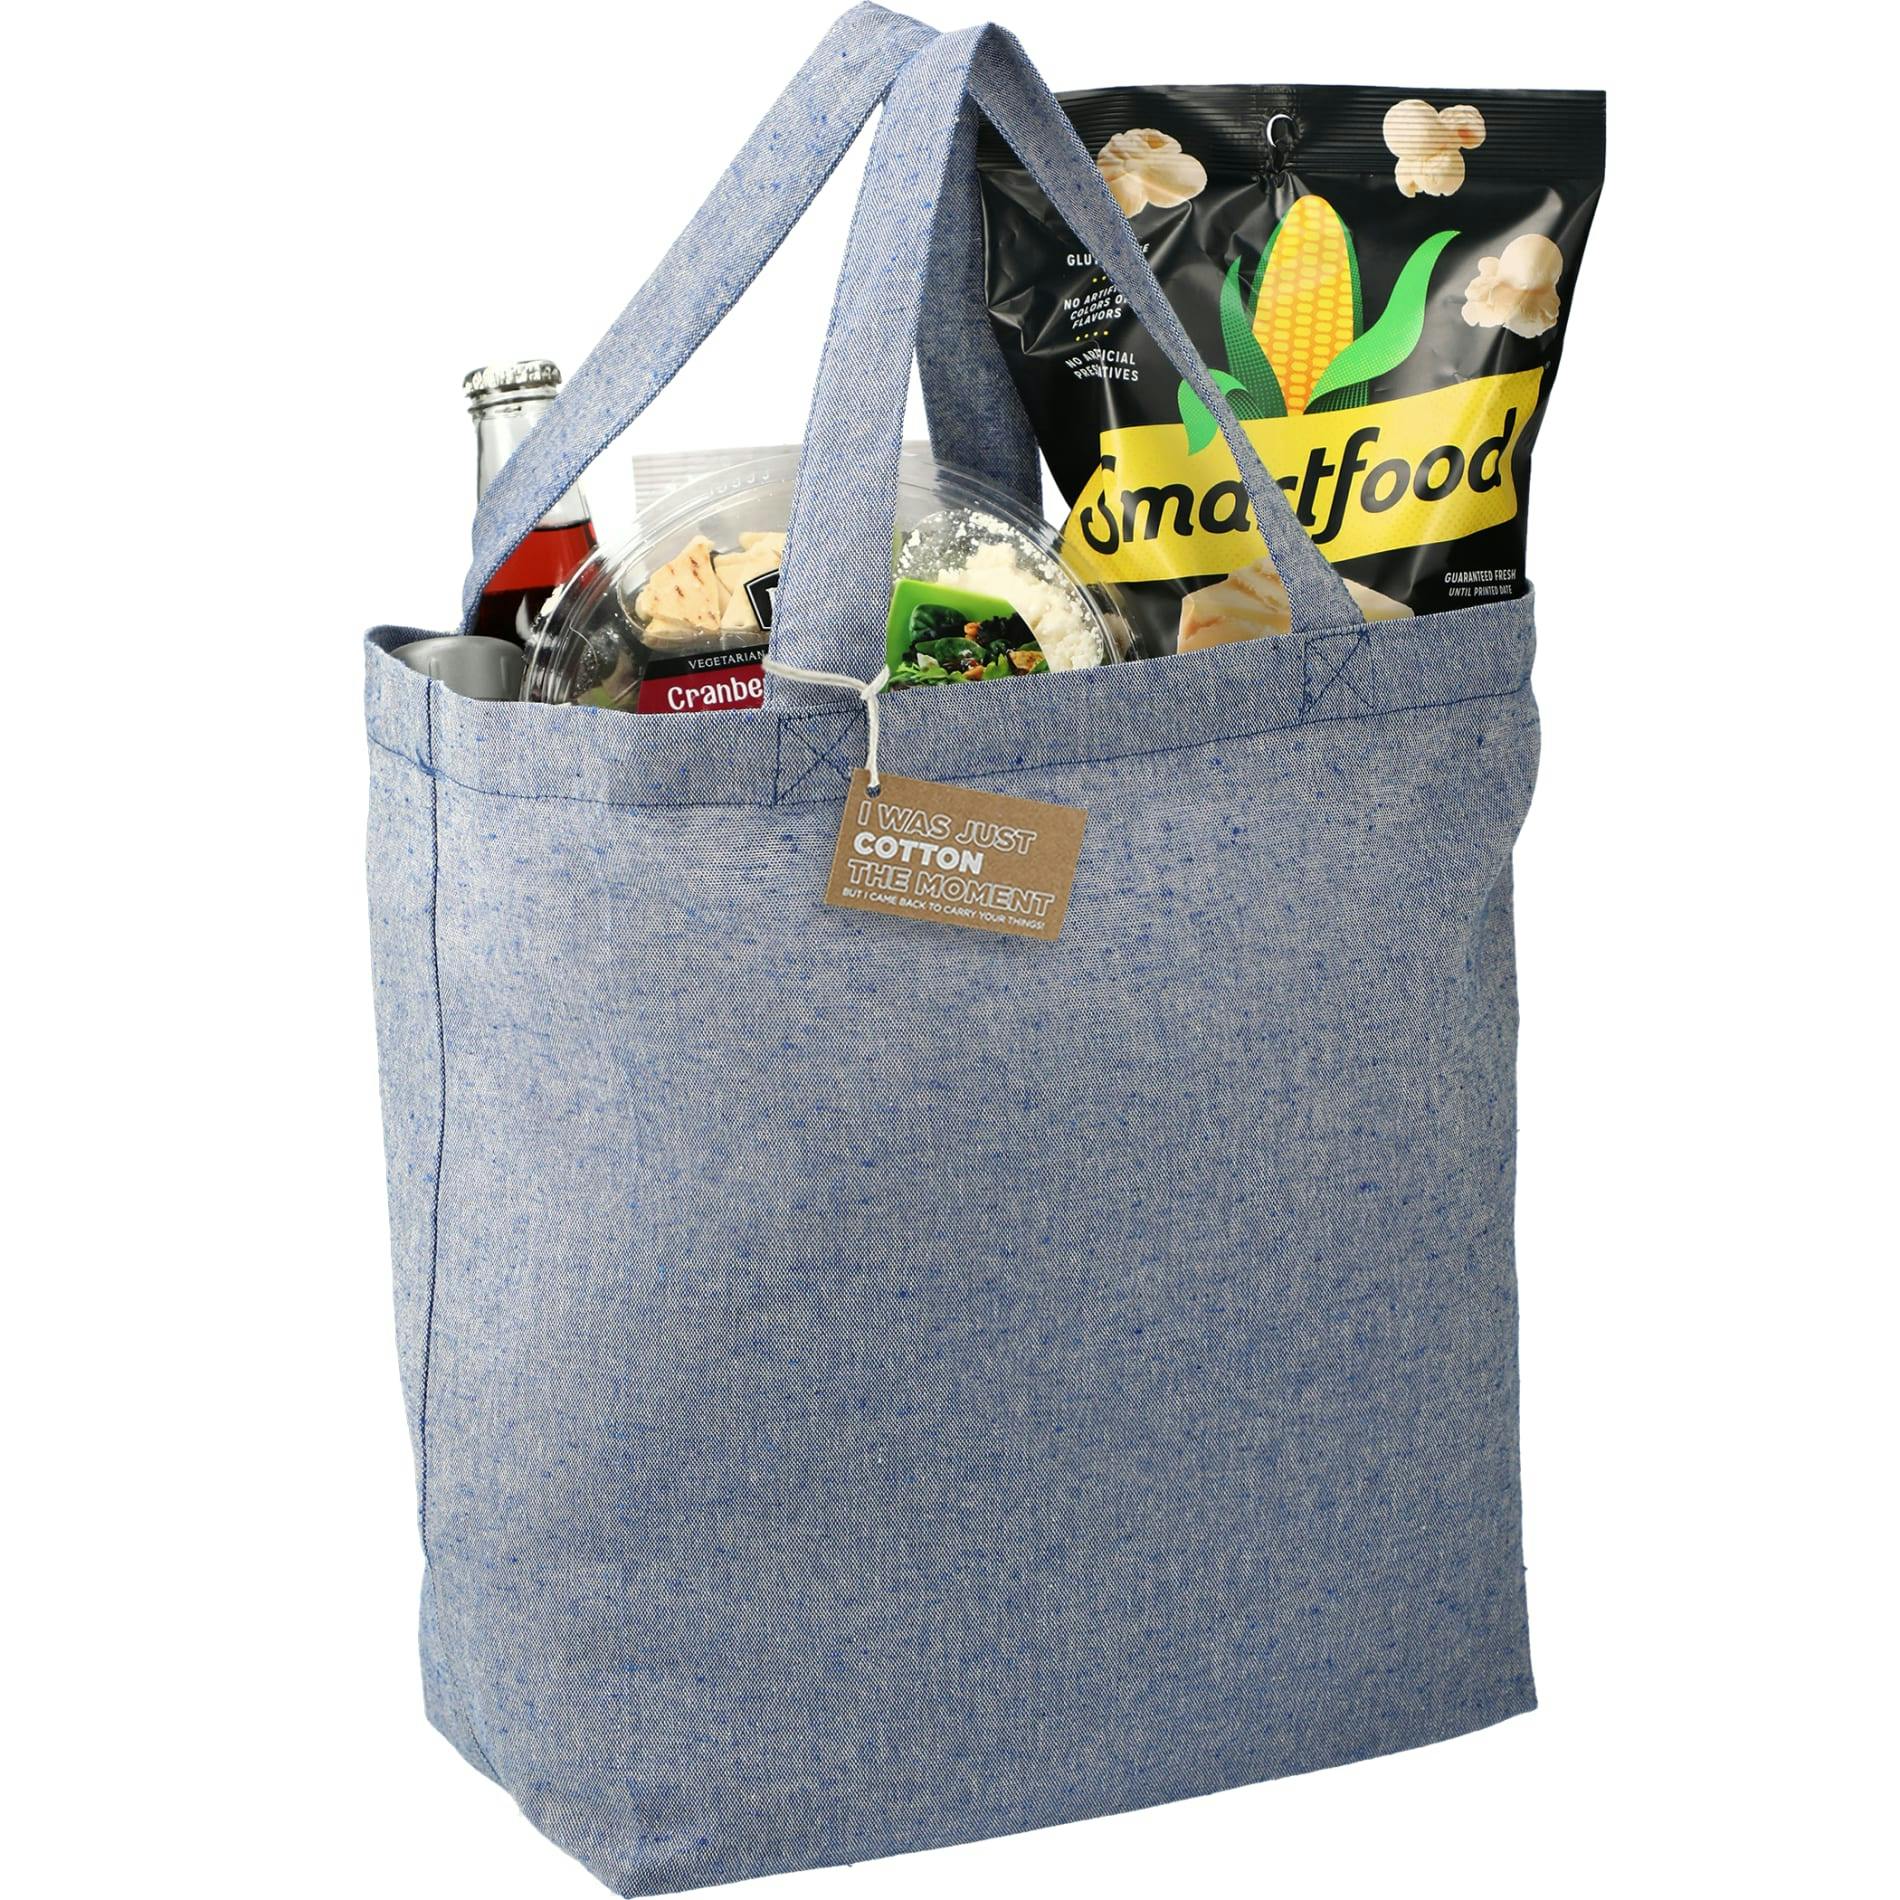 Recycled 5oz Cotton Twill Grocery Tote - additional Image 4